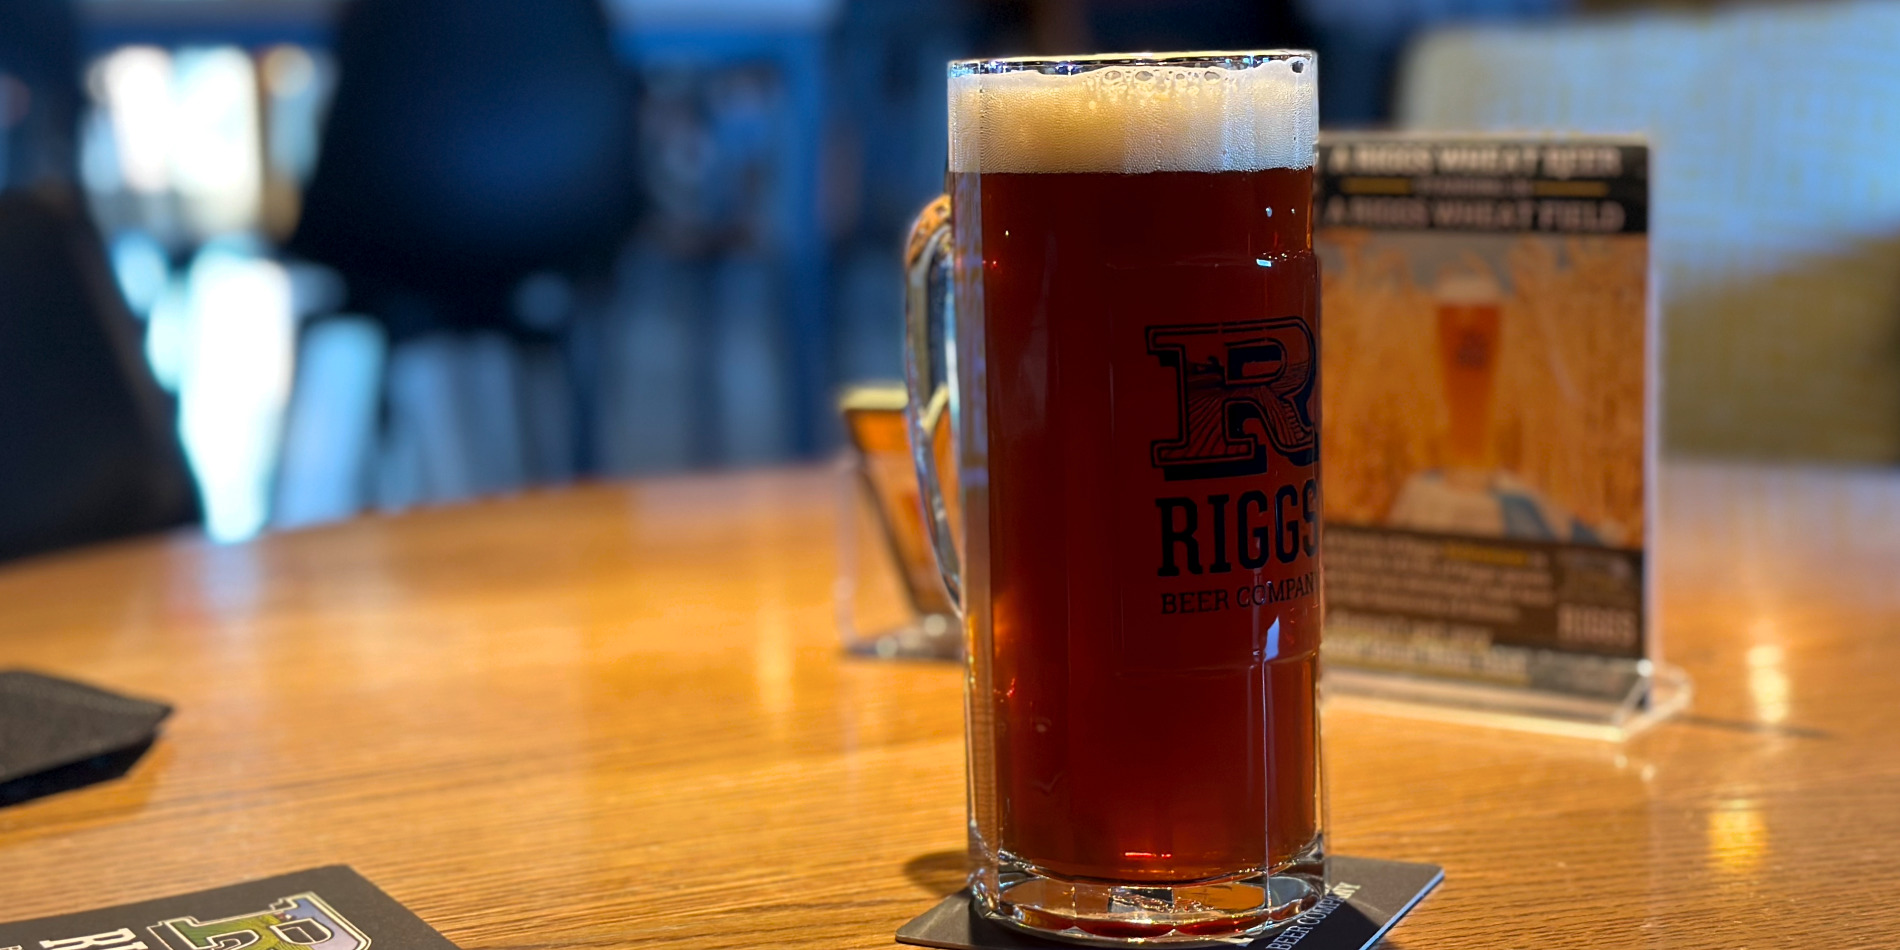 On a warm wooden counter inside Riggs Brewing Company in Urbana, Illinois, there is a red lager in a glass. Photo by Jake Williams.